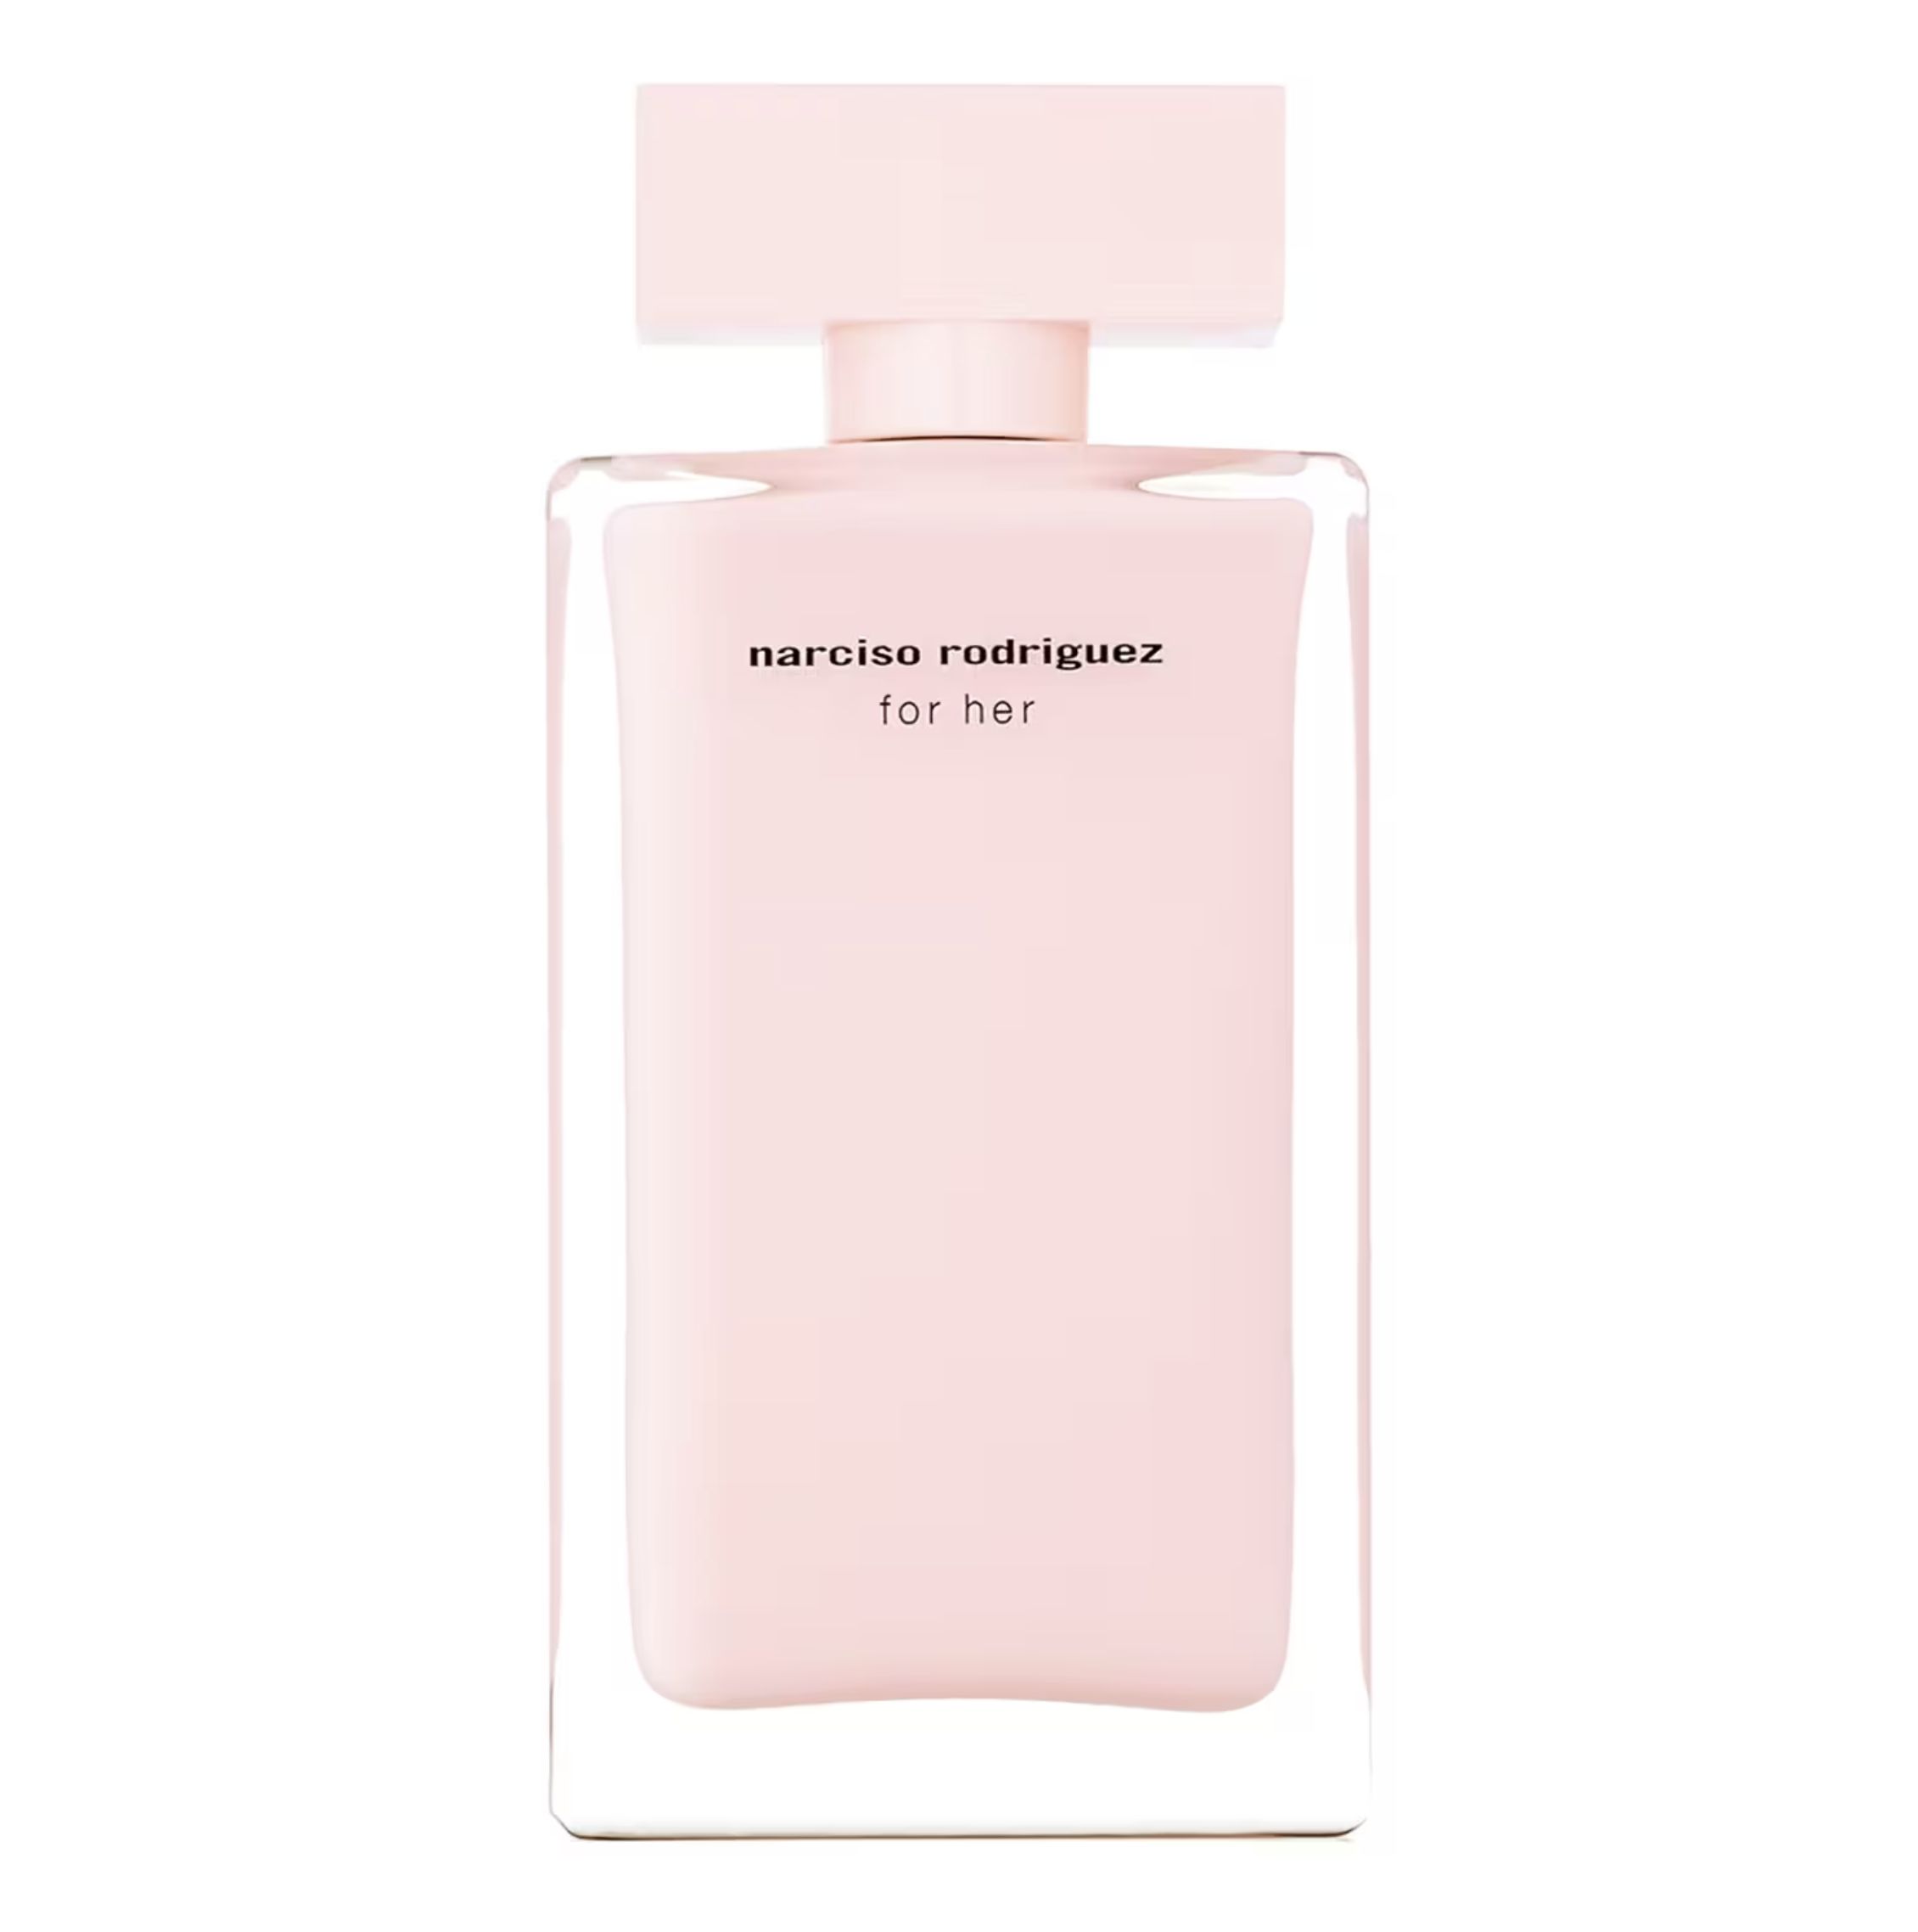 Narciso rodriguez for her rose